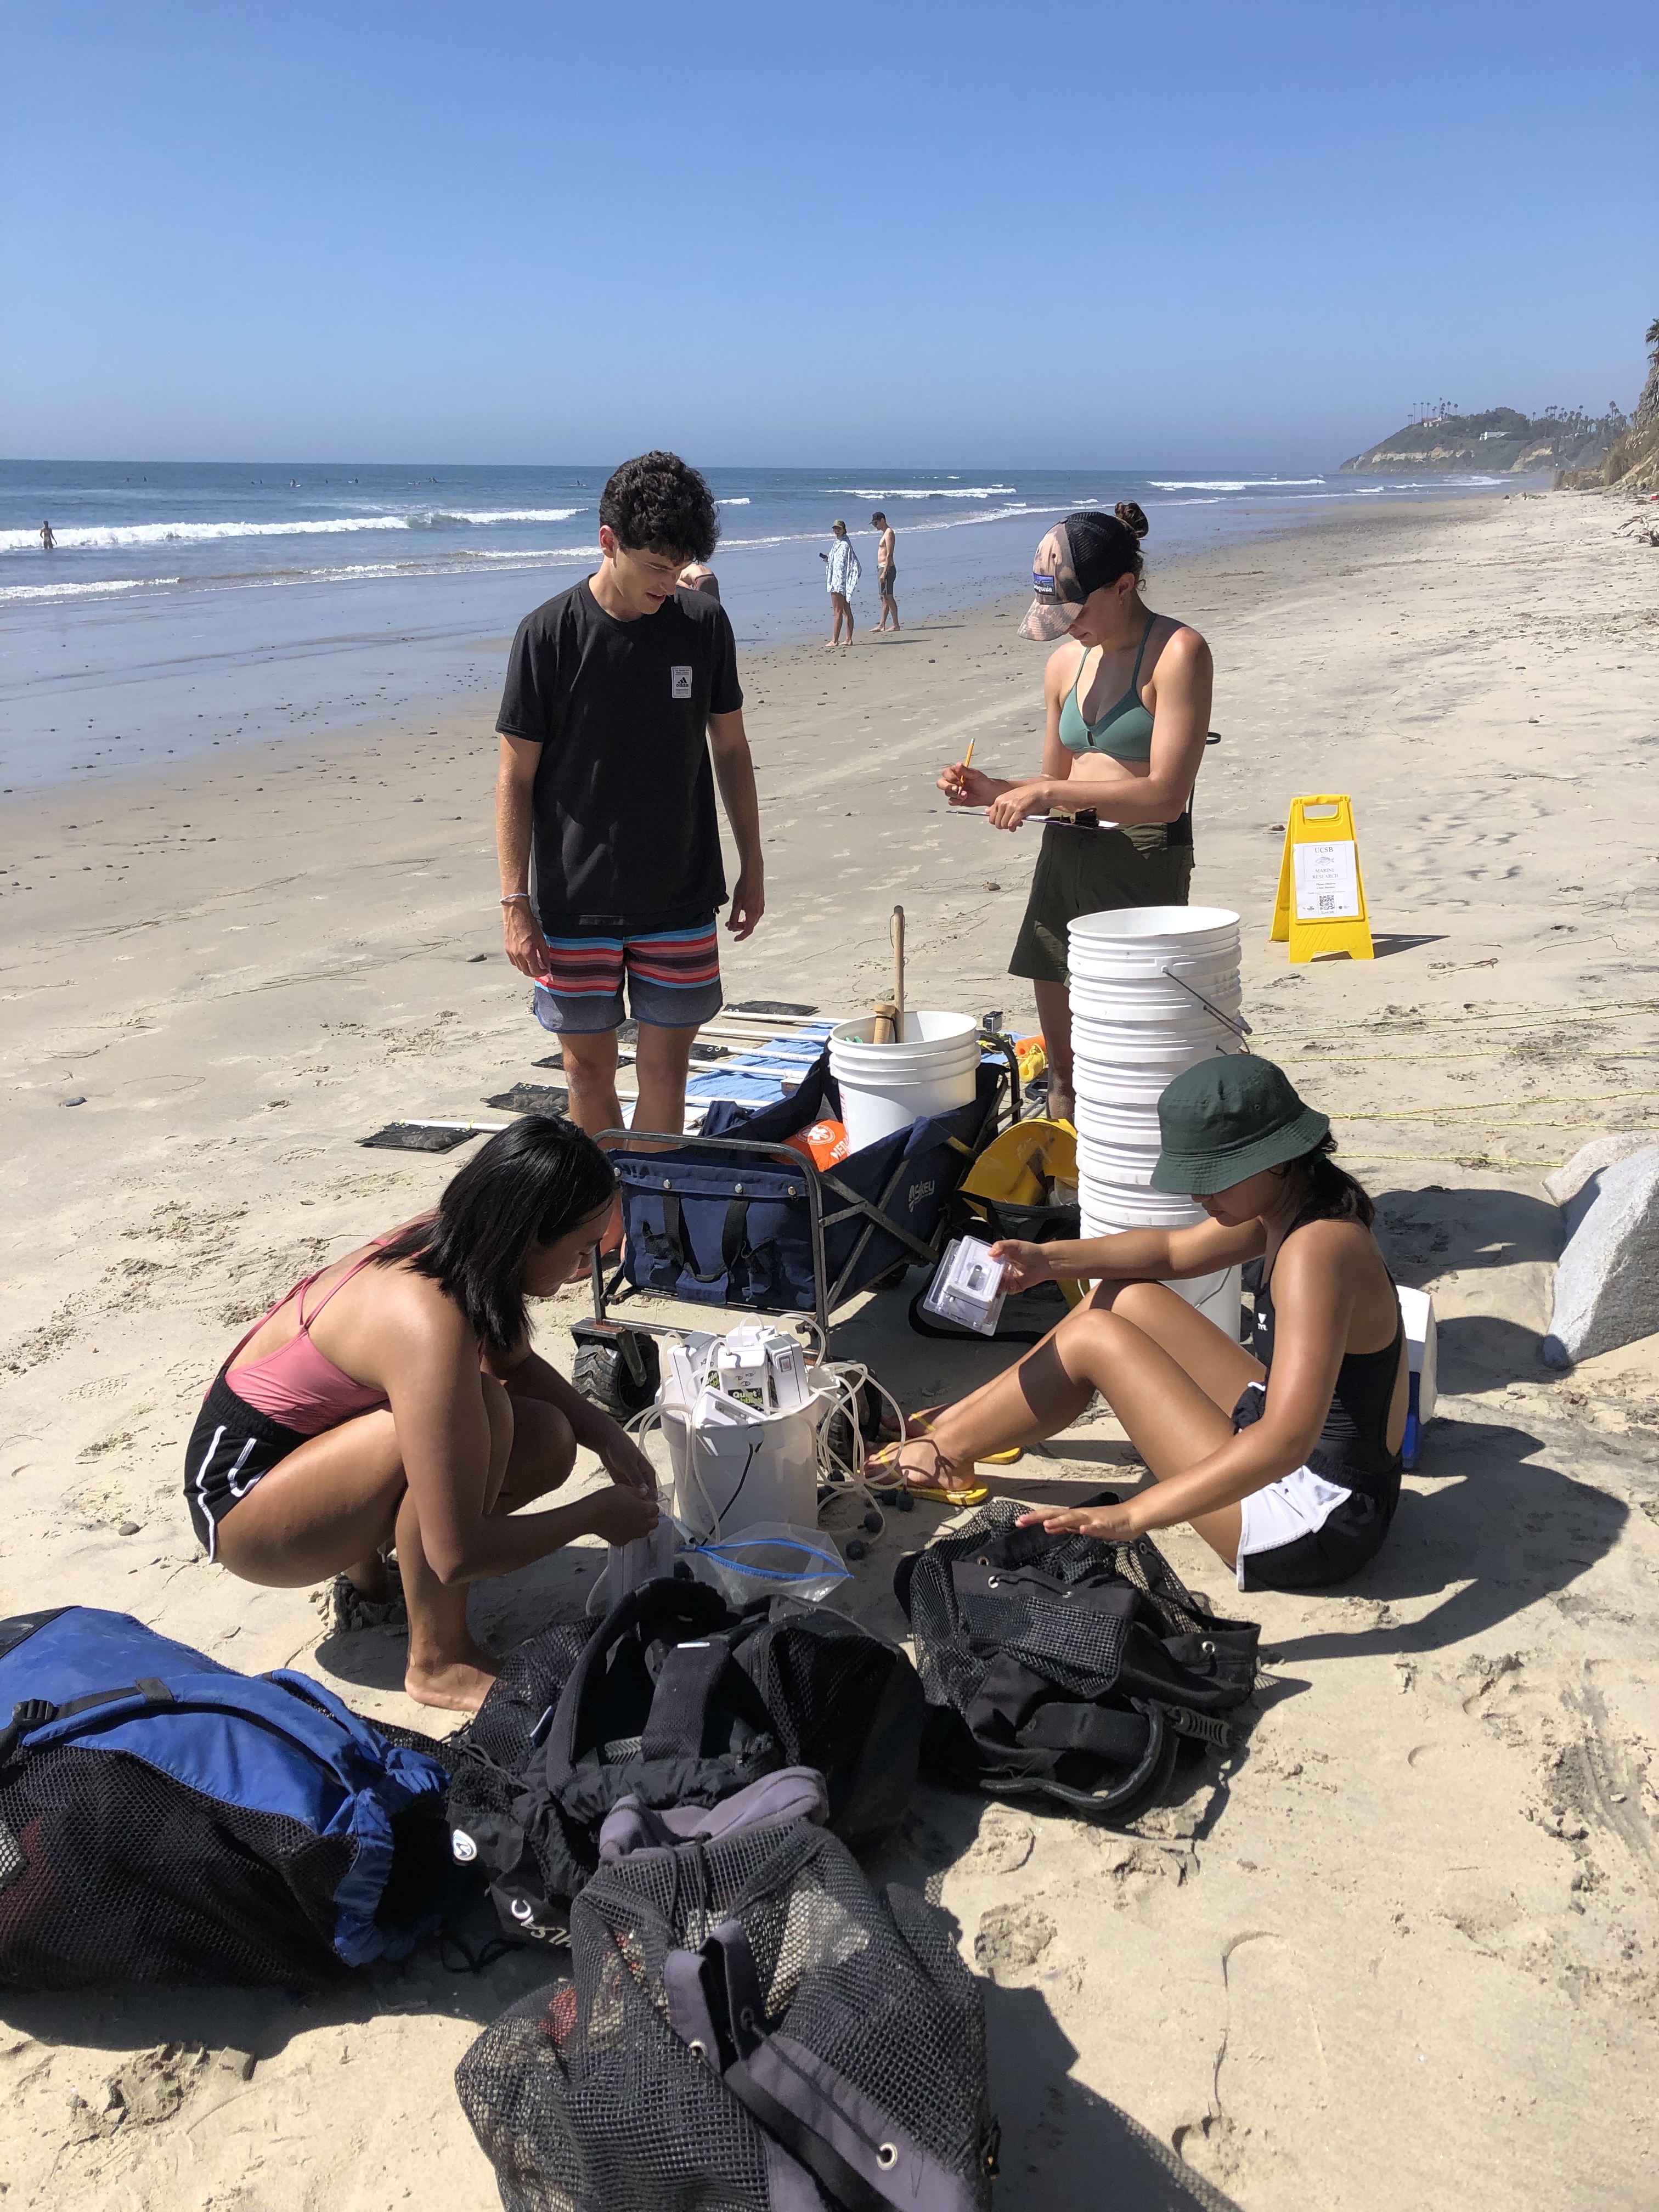 The team organizes tools and equipment for the beach survey.